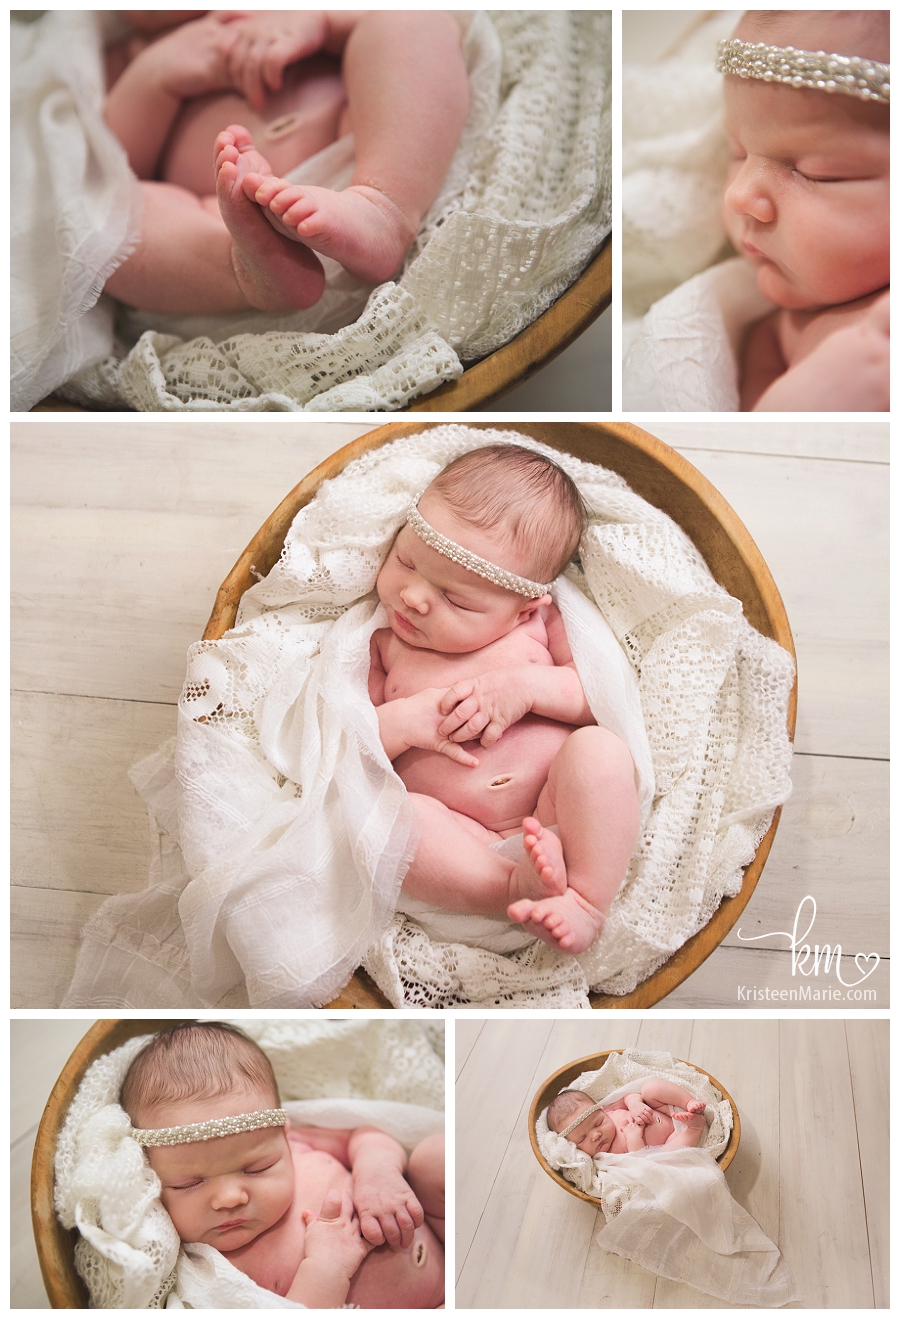 cream and white newborn picture - baby in a bowl